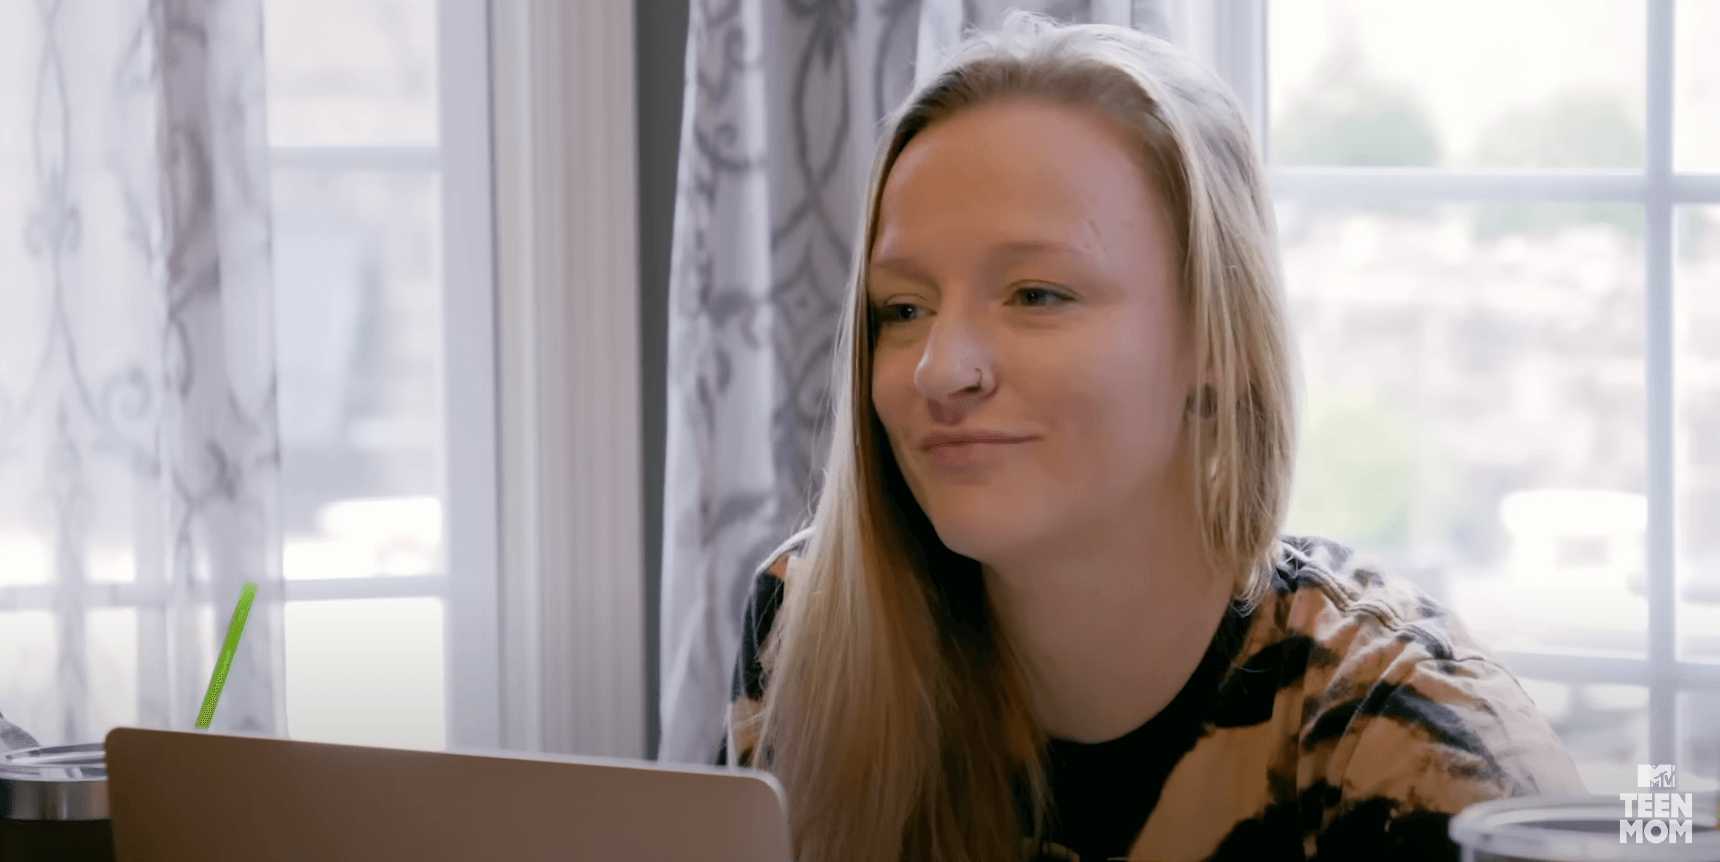 Maci Bookout in 'Teen Mom: The Next Chapter' Season 2